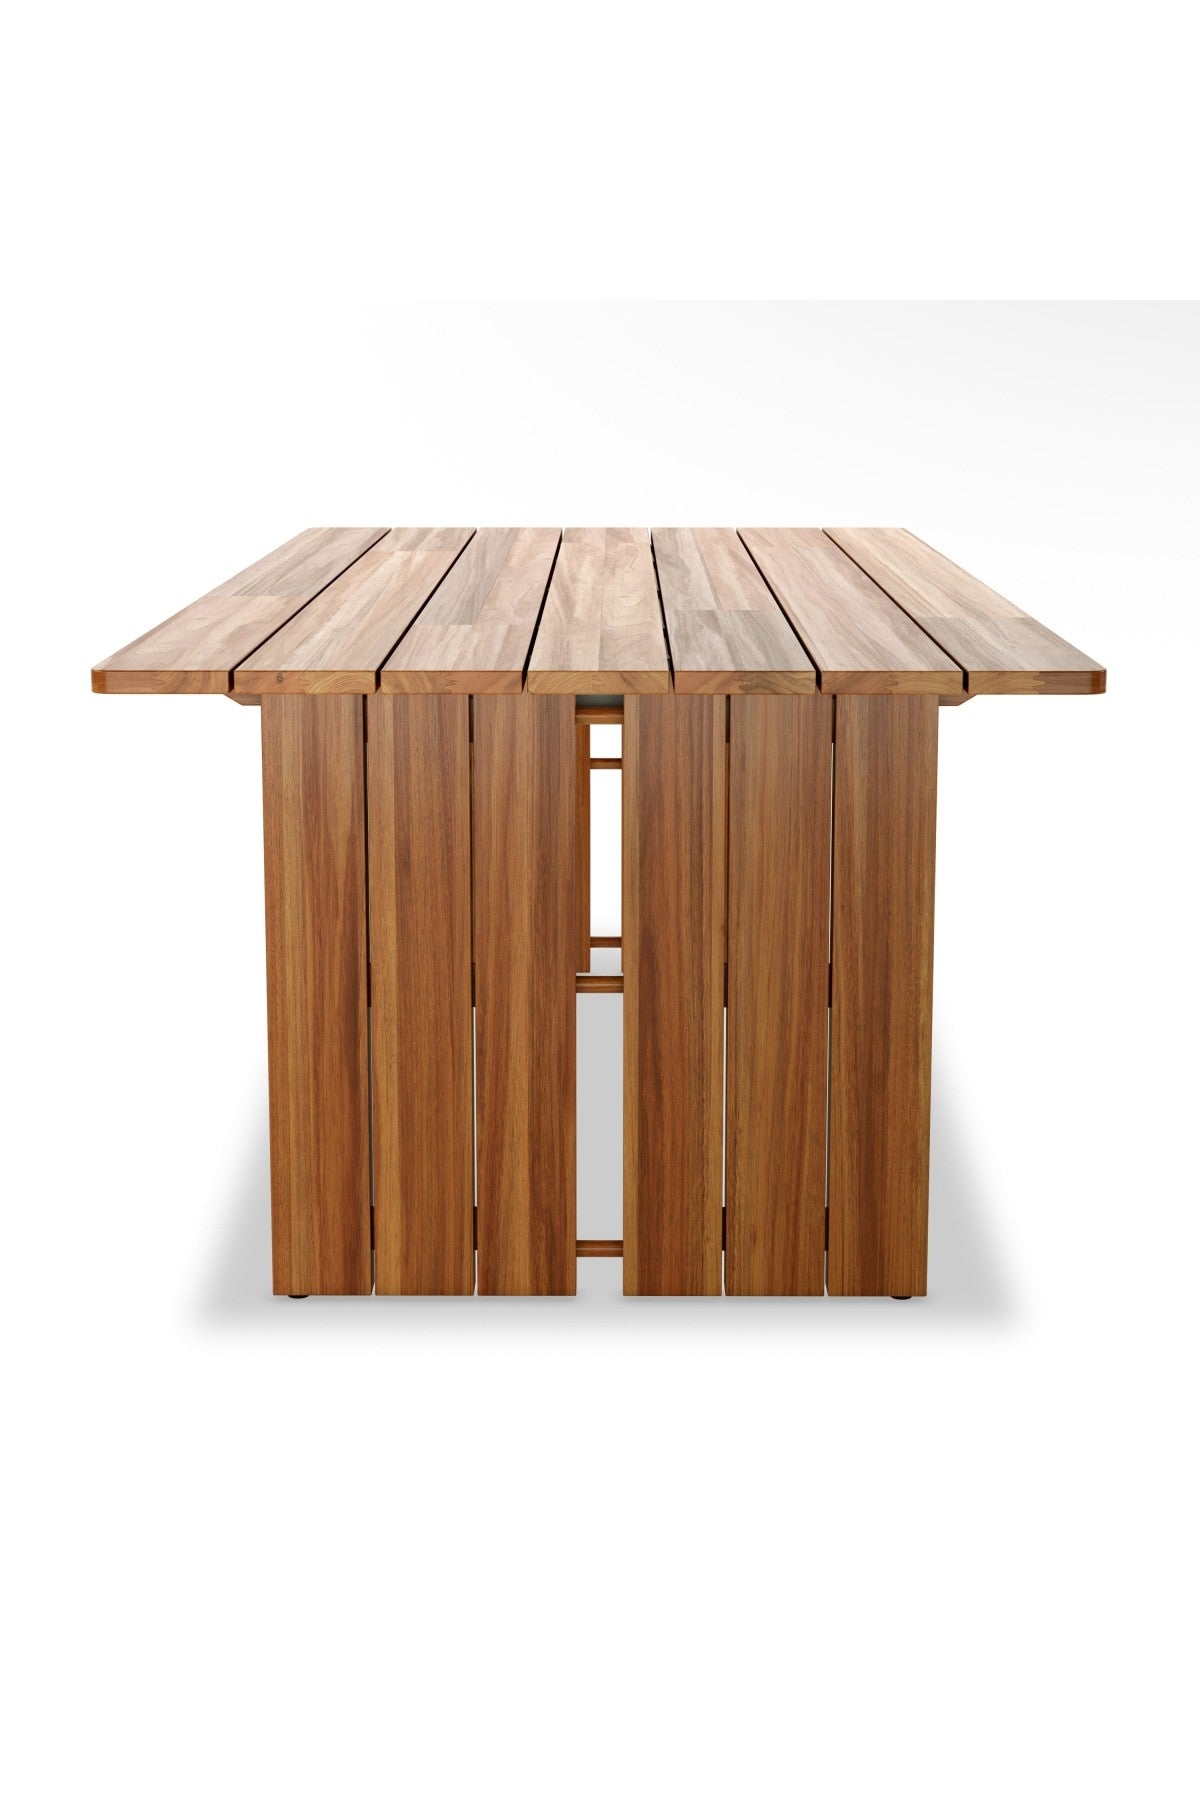 Chappy Outdoor Dining Table - 2 Sizes